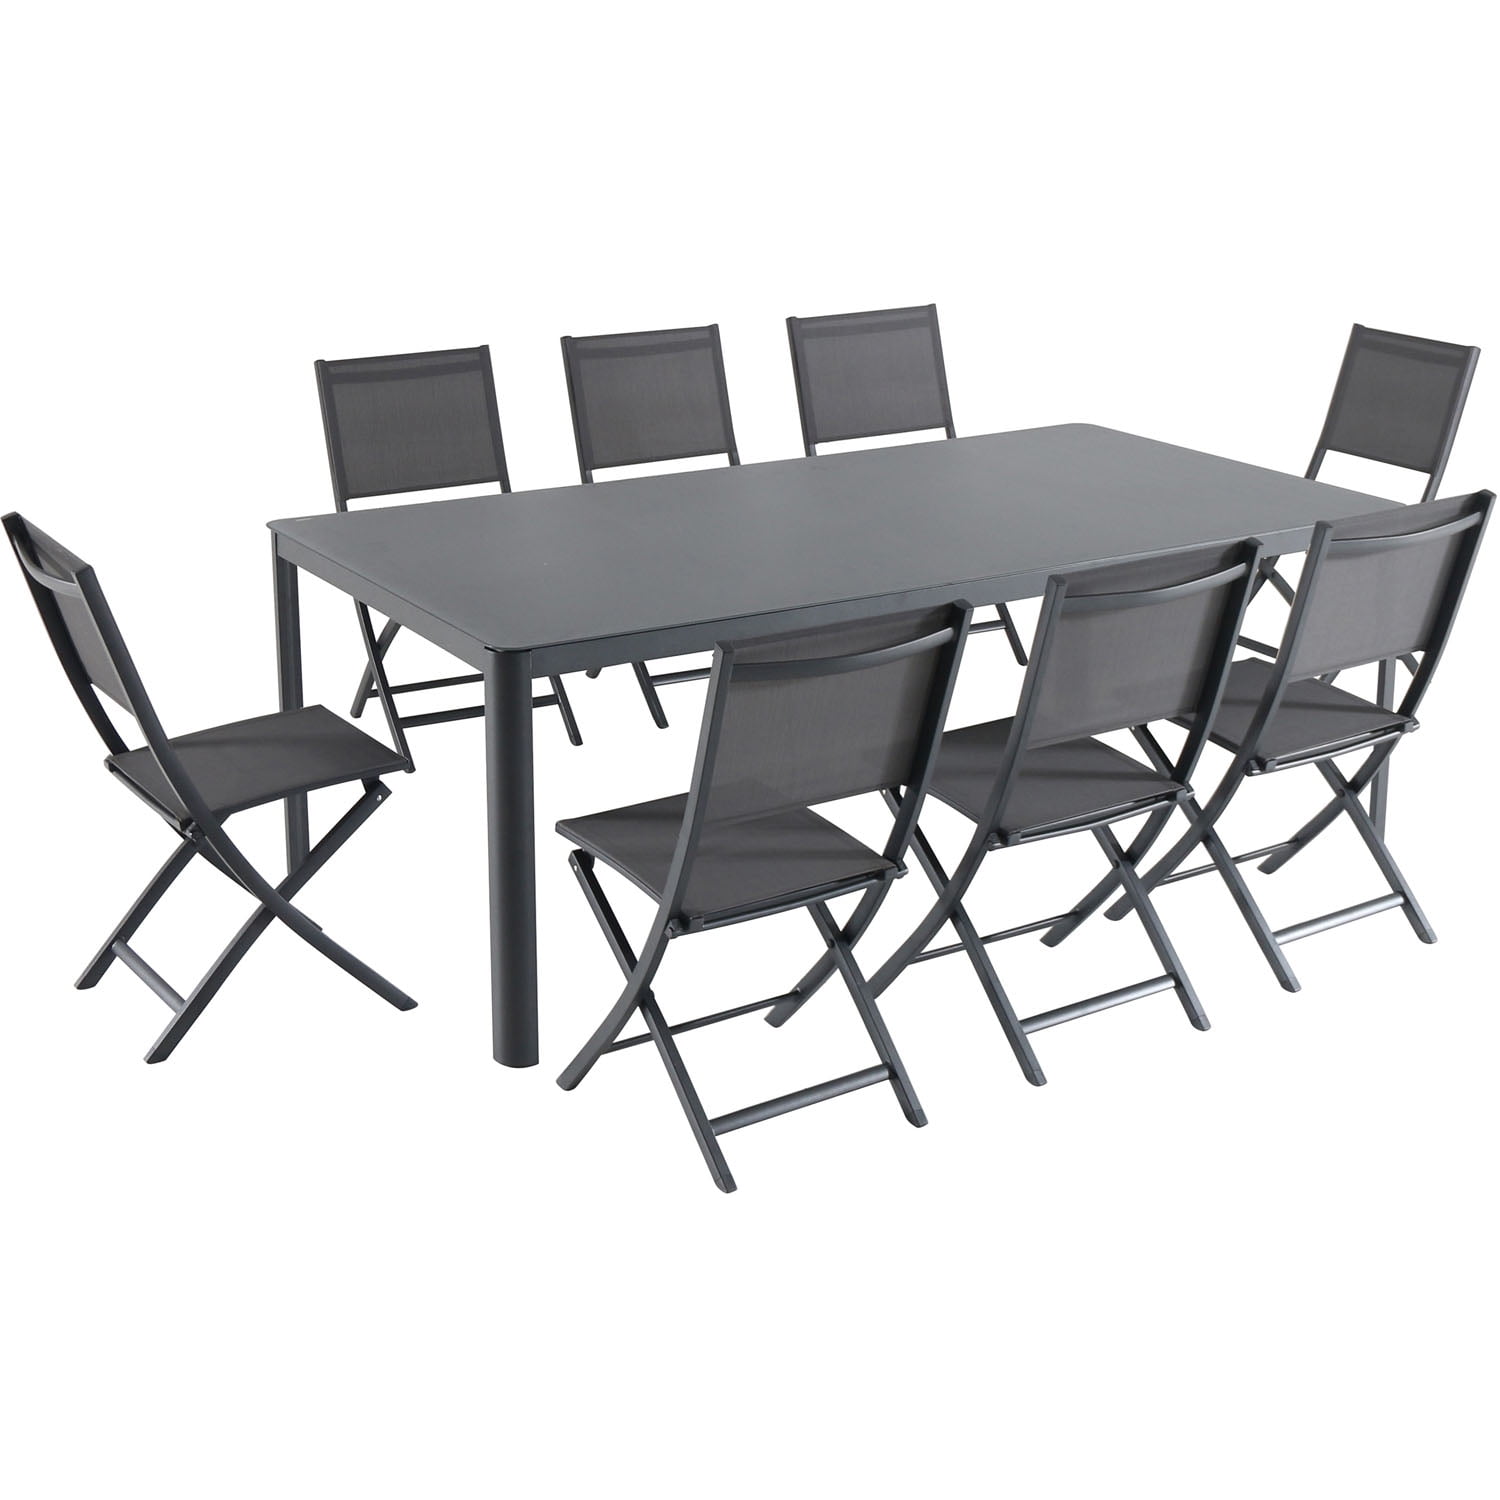 Hanover Fresno 9-Piece Outdoor Dining Set with 8 Folding ...